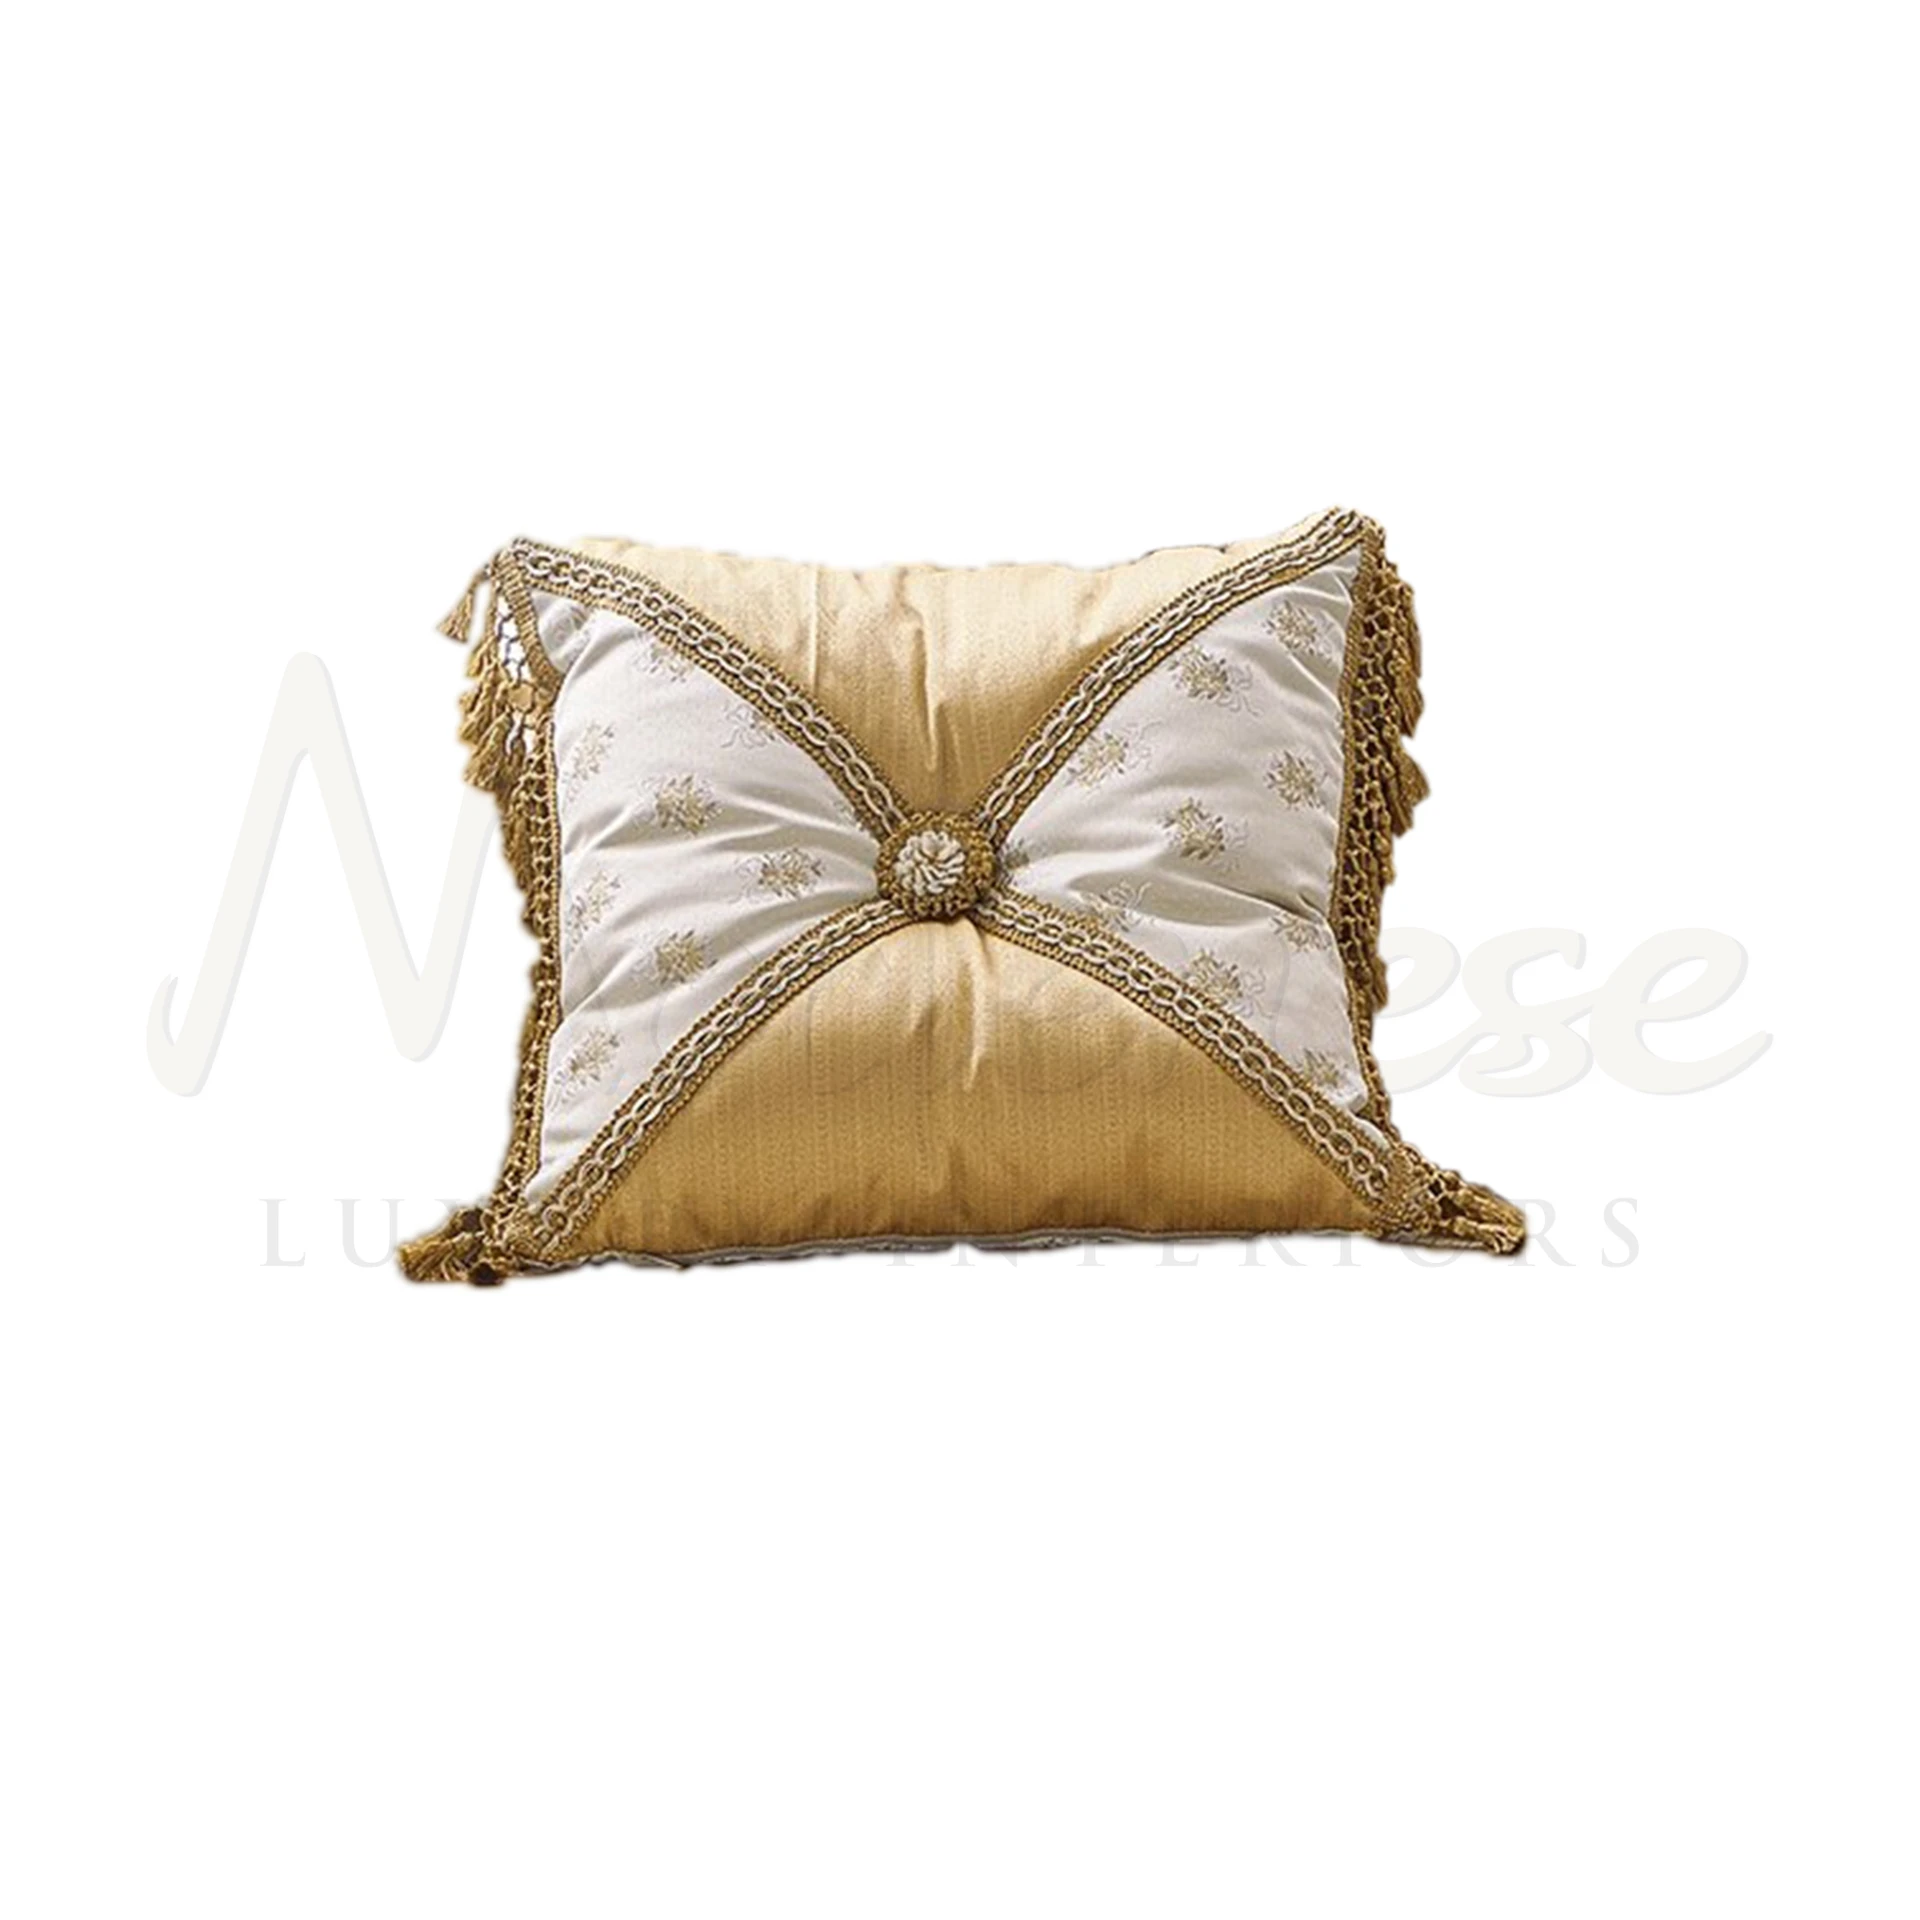 Regal Pillow by Modenese, showcasing Italian luxury with its high-quality textiles and classical design, perfect for elegant interiors.